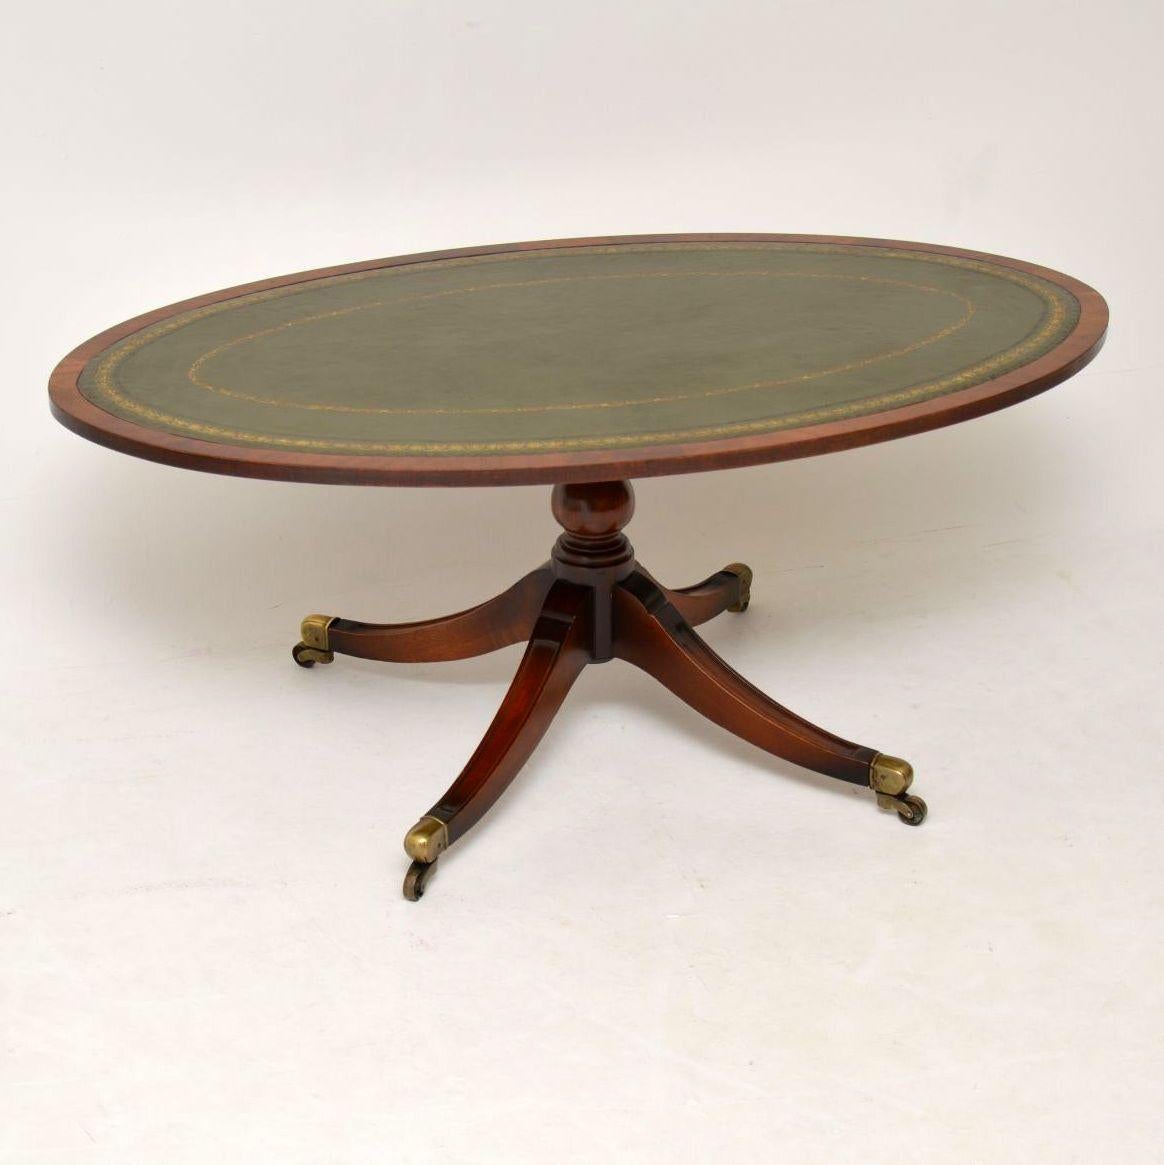 Antique Regency style mahogany coffee table with a tooled leather oval top. It’s in excellent condition and dates to circa 1930s-1950s period. It’s very sturdy and sits on a boldly turned pedestal with four sabre legs and brass capped casters. This